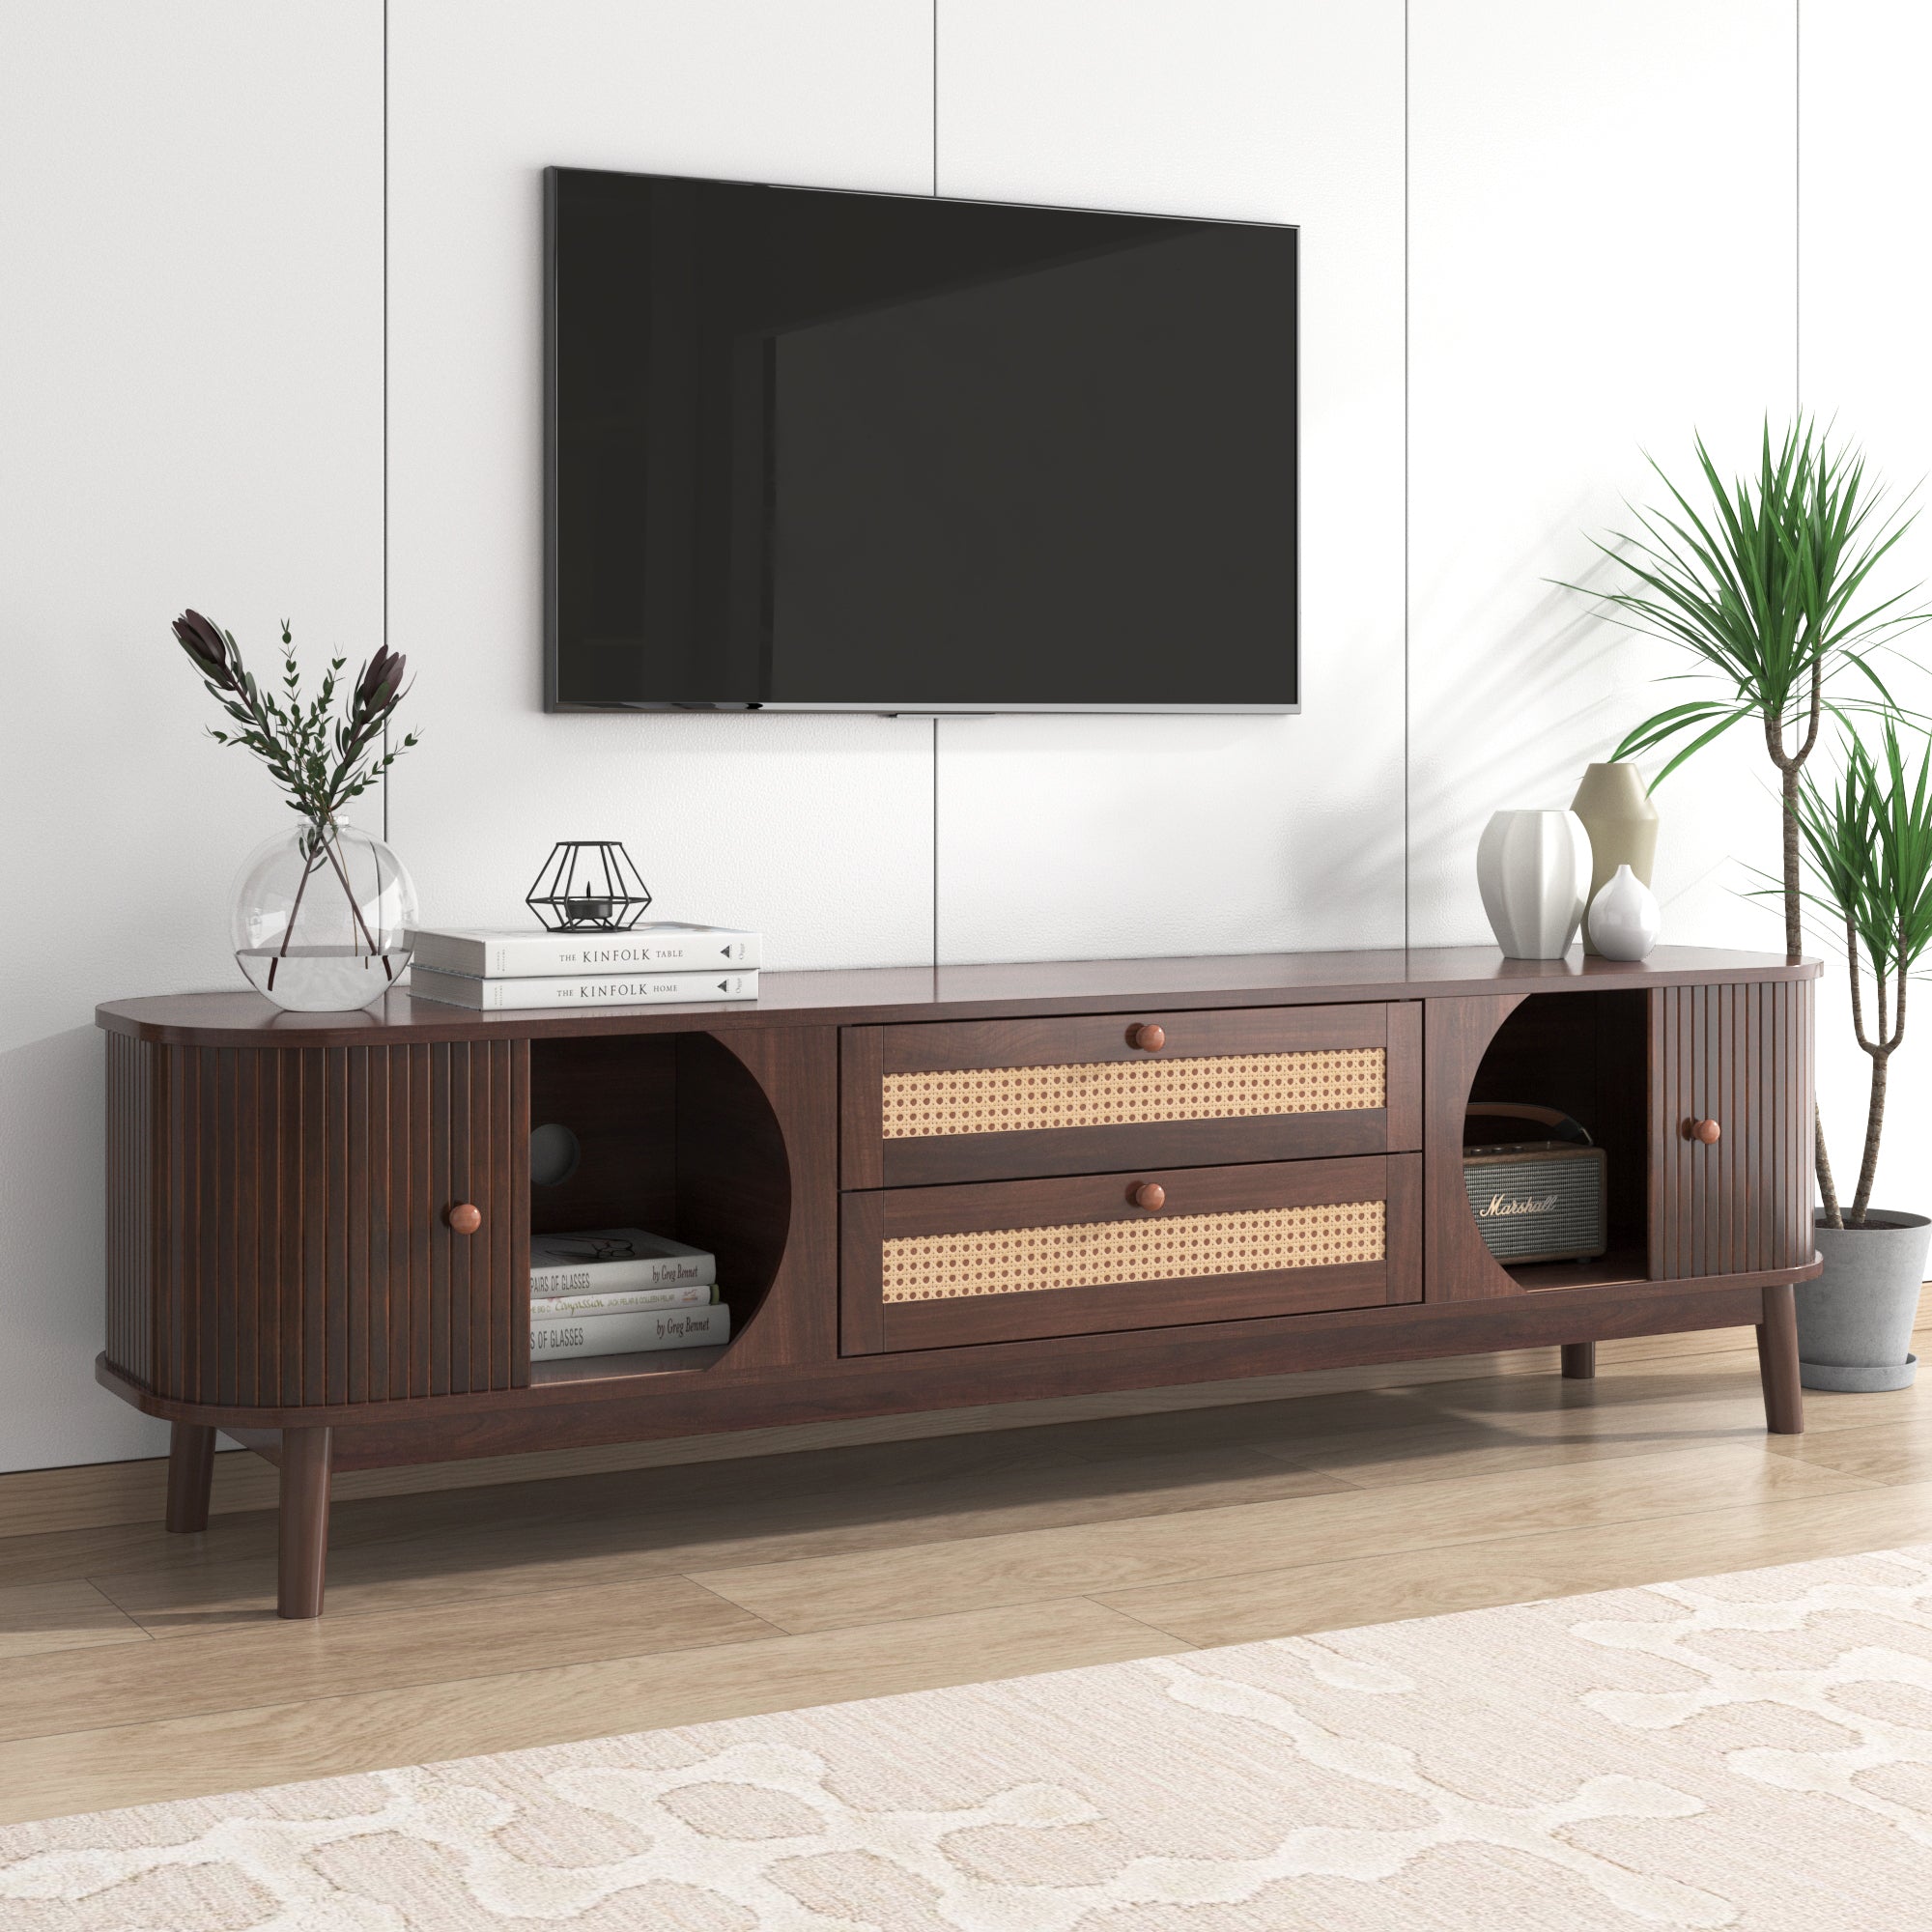 Rattan TV Stand for TVs up to 75'', Modern Farmhouse natural wood+brown-primary living space-60-69